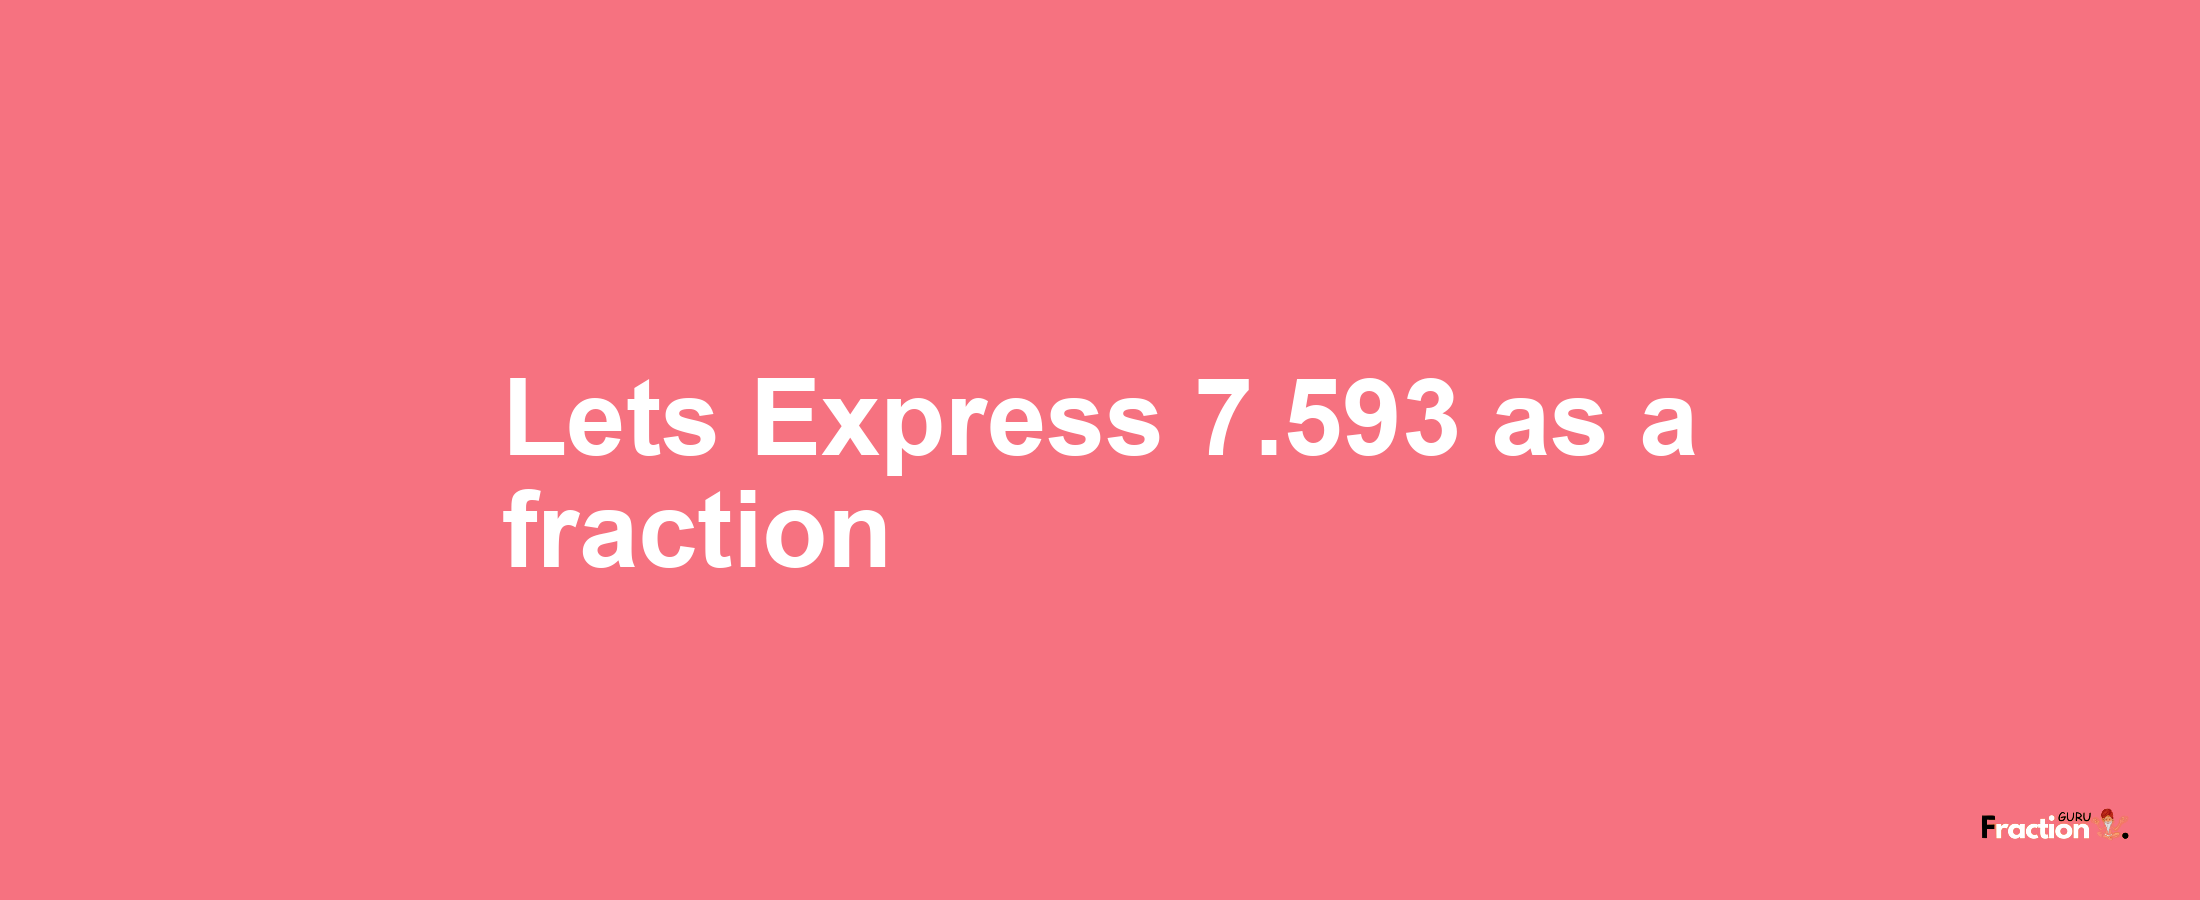 Lets Express 7.593 as afraction